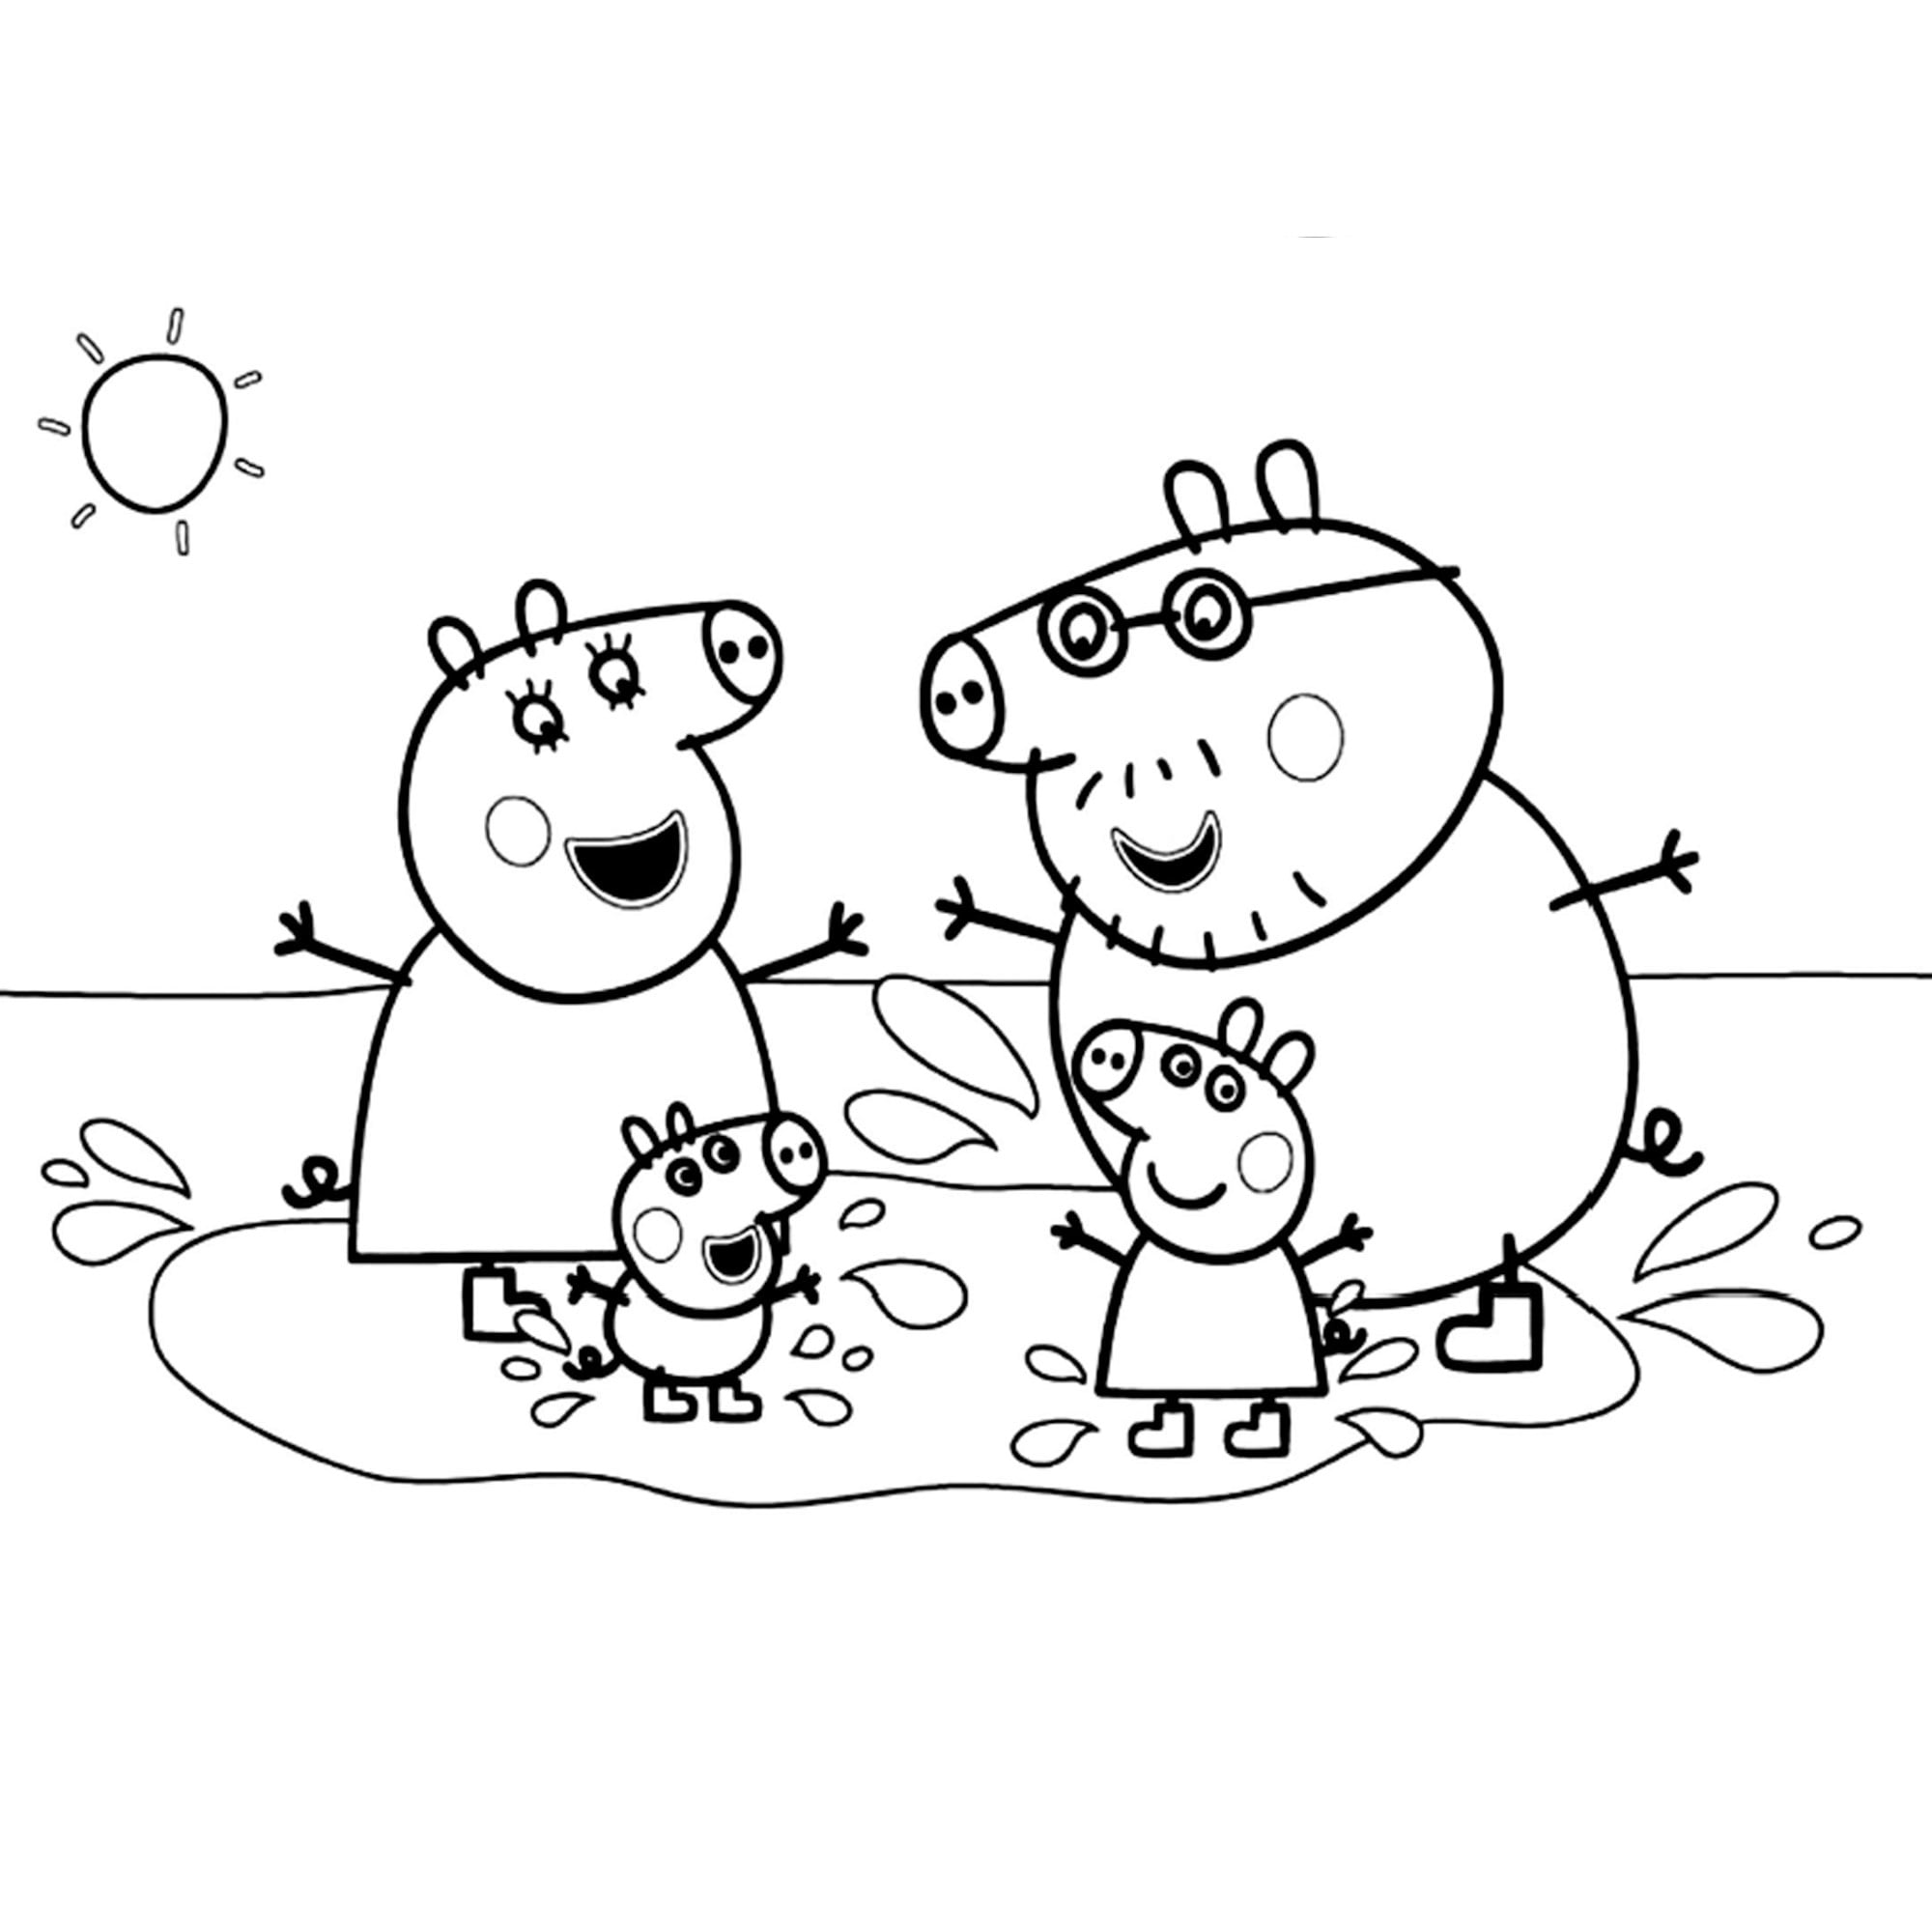 Peppa pigs kids colouring pages digital download amazing art work children colouring book over pictures